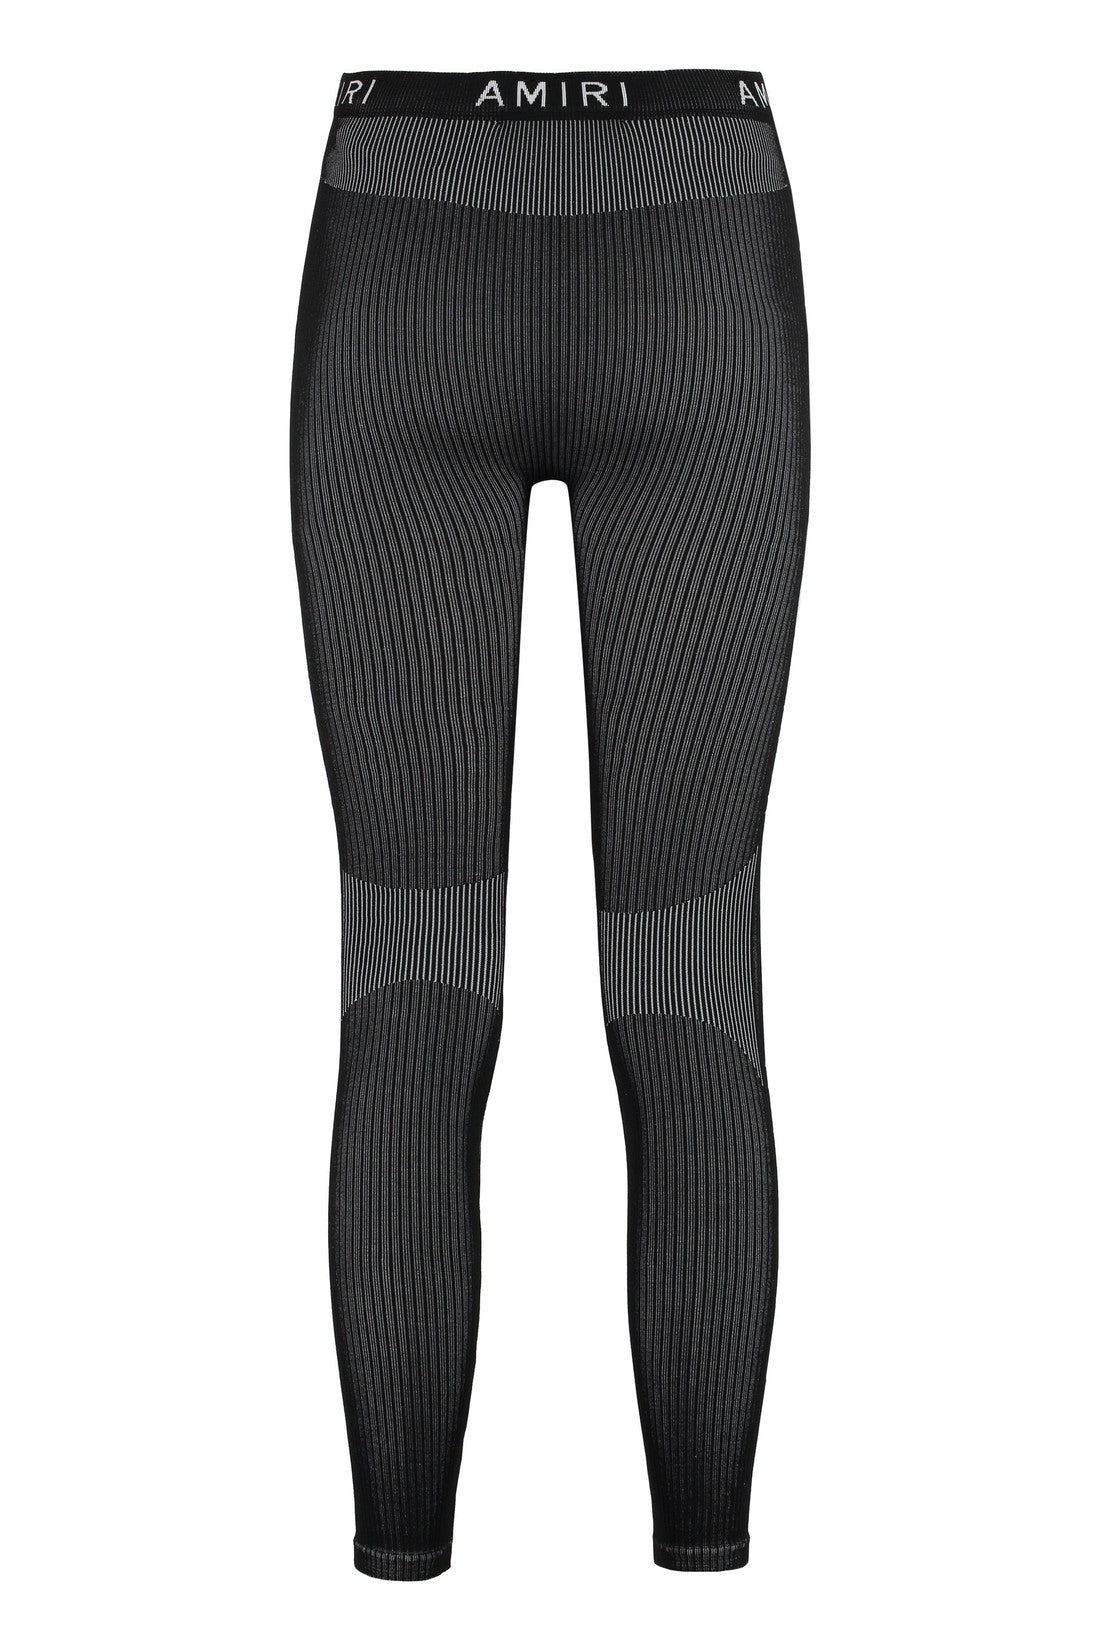 AMIRI-OUTLET-SALE-Ribbed stretch leggings-ARCHIVIST